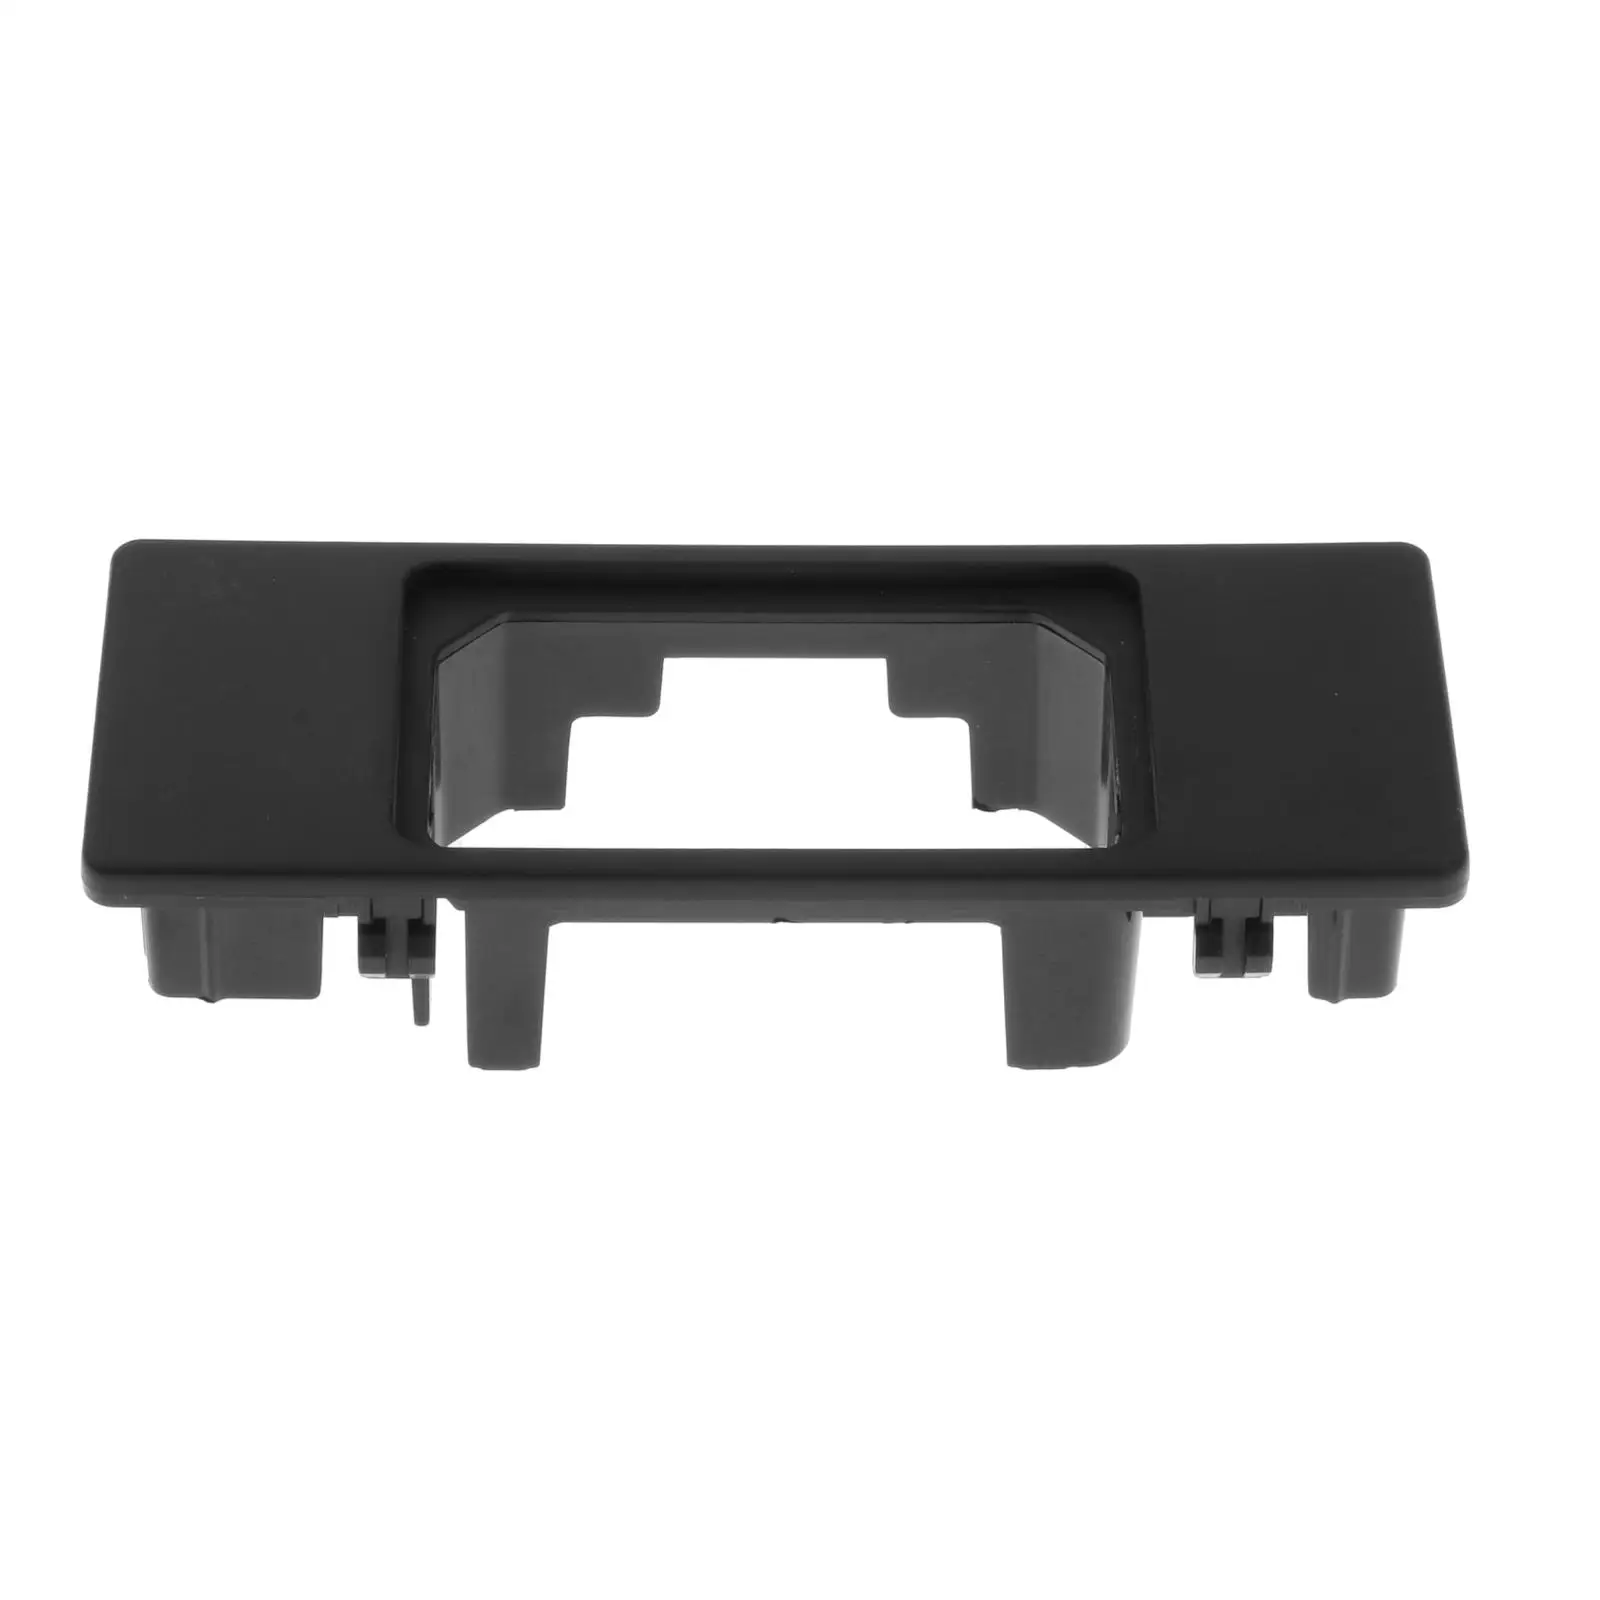 

Plastic USB Module Cover Replaces Parts 116x43mm for the SYNC3 USB Interface Module